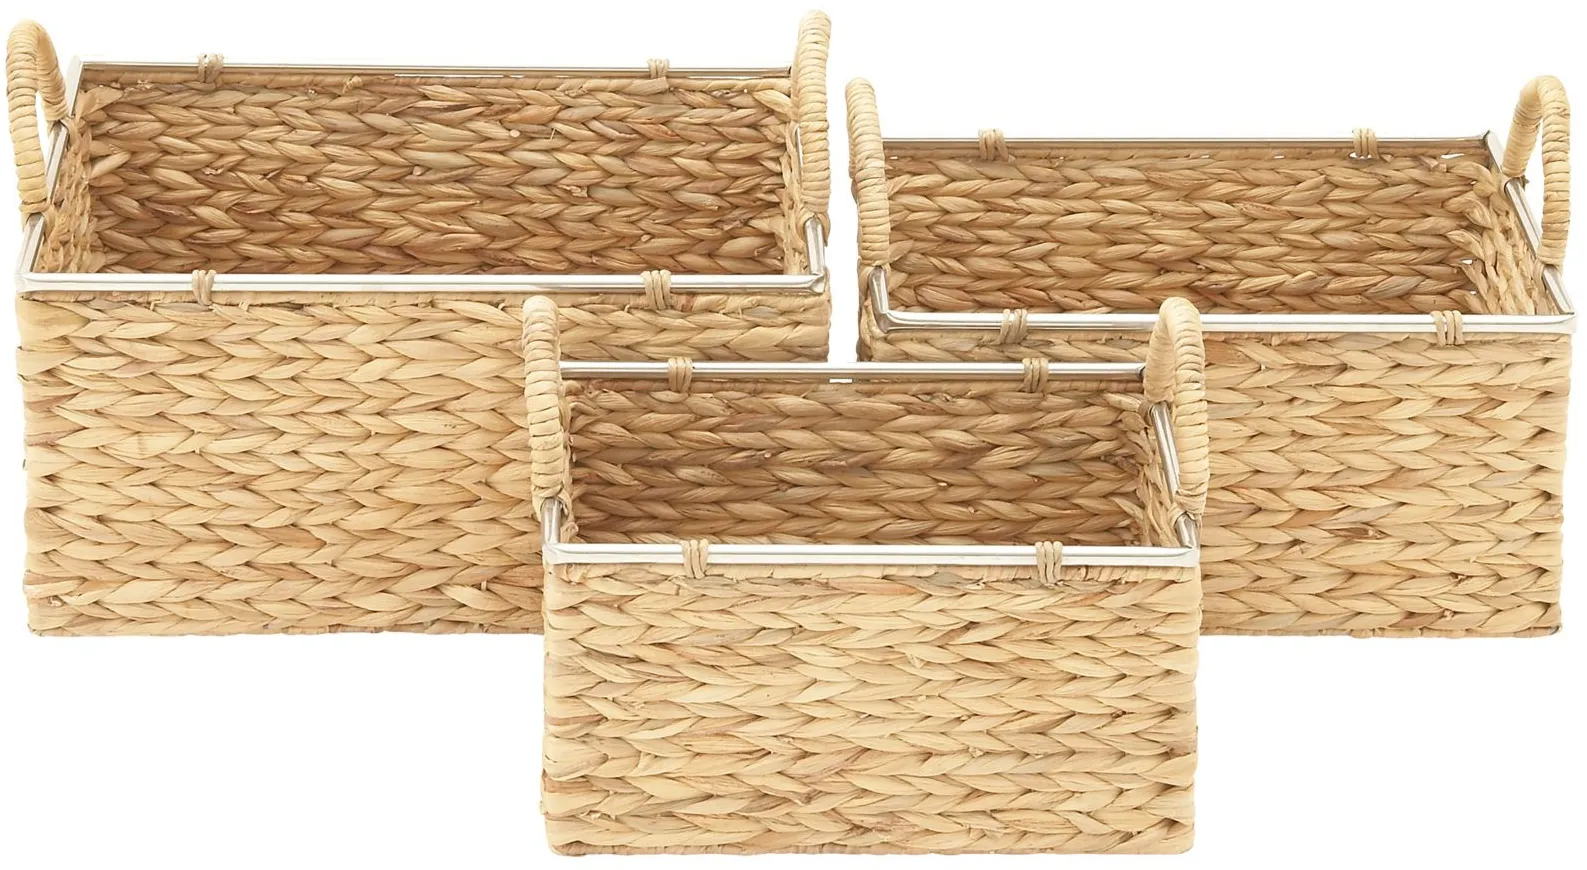 Ivy Collection Storage Baskets - Set of 3 in Tan by UMA Enterprises